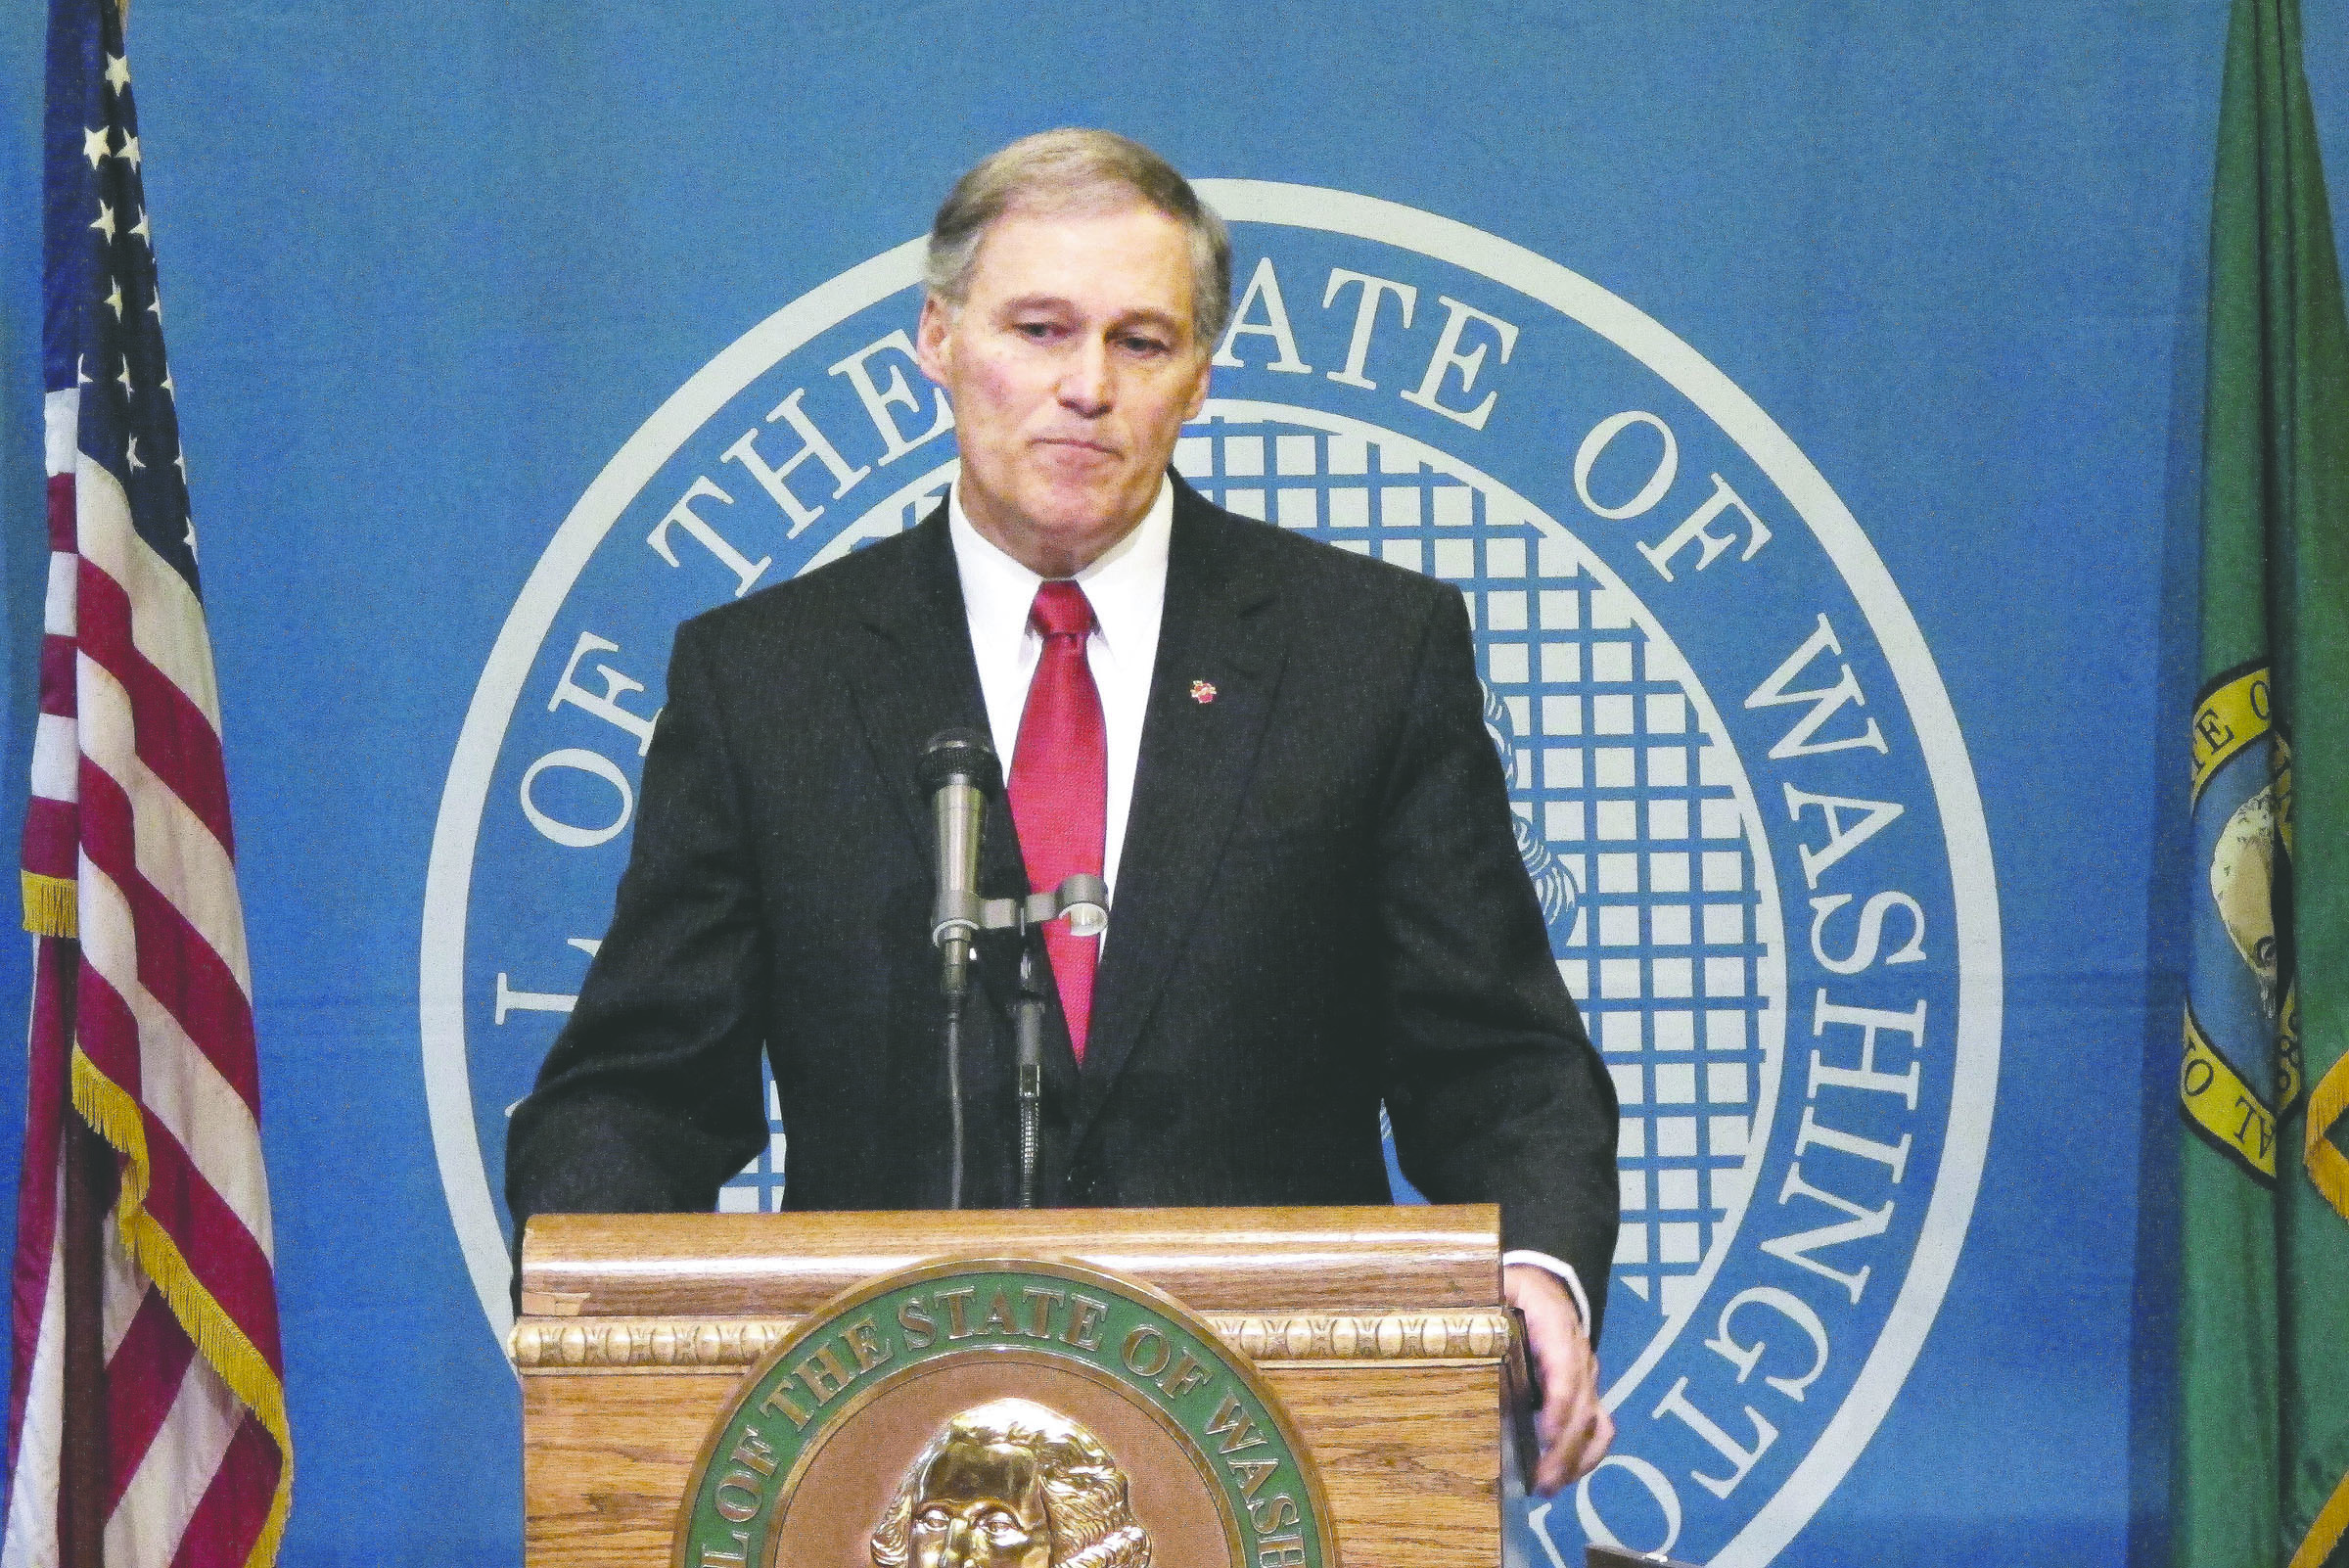 Gov. Jay Inslee announced Tuesday that he is suspending the use of the death penalty in Washington. Inslee’s moratorium